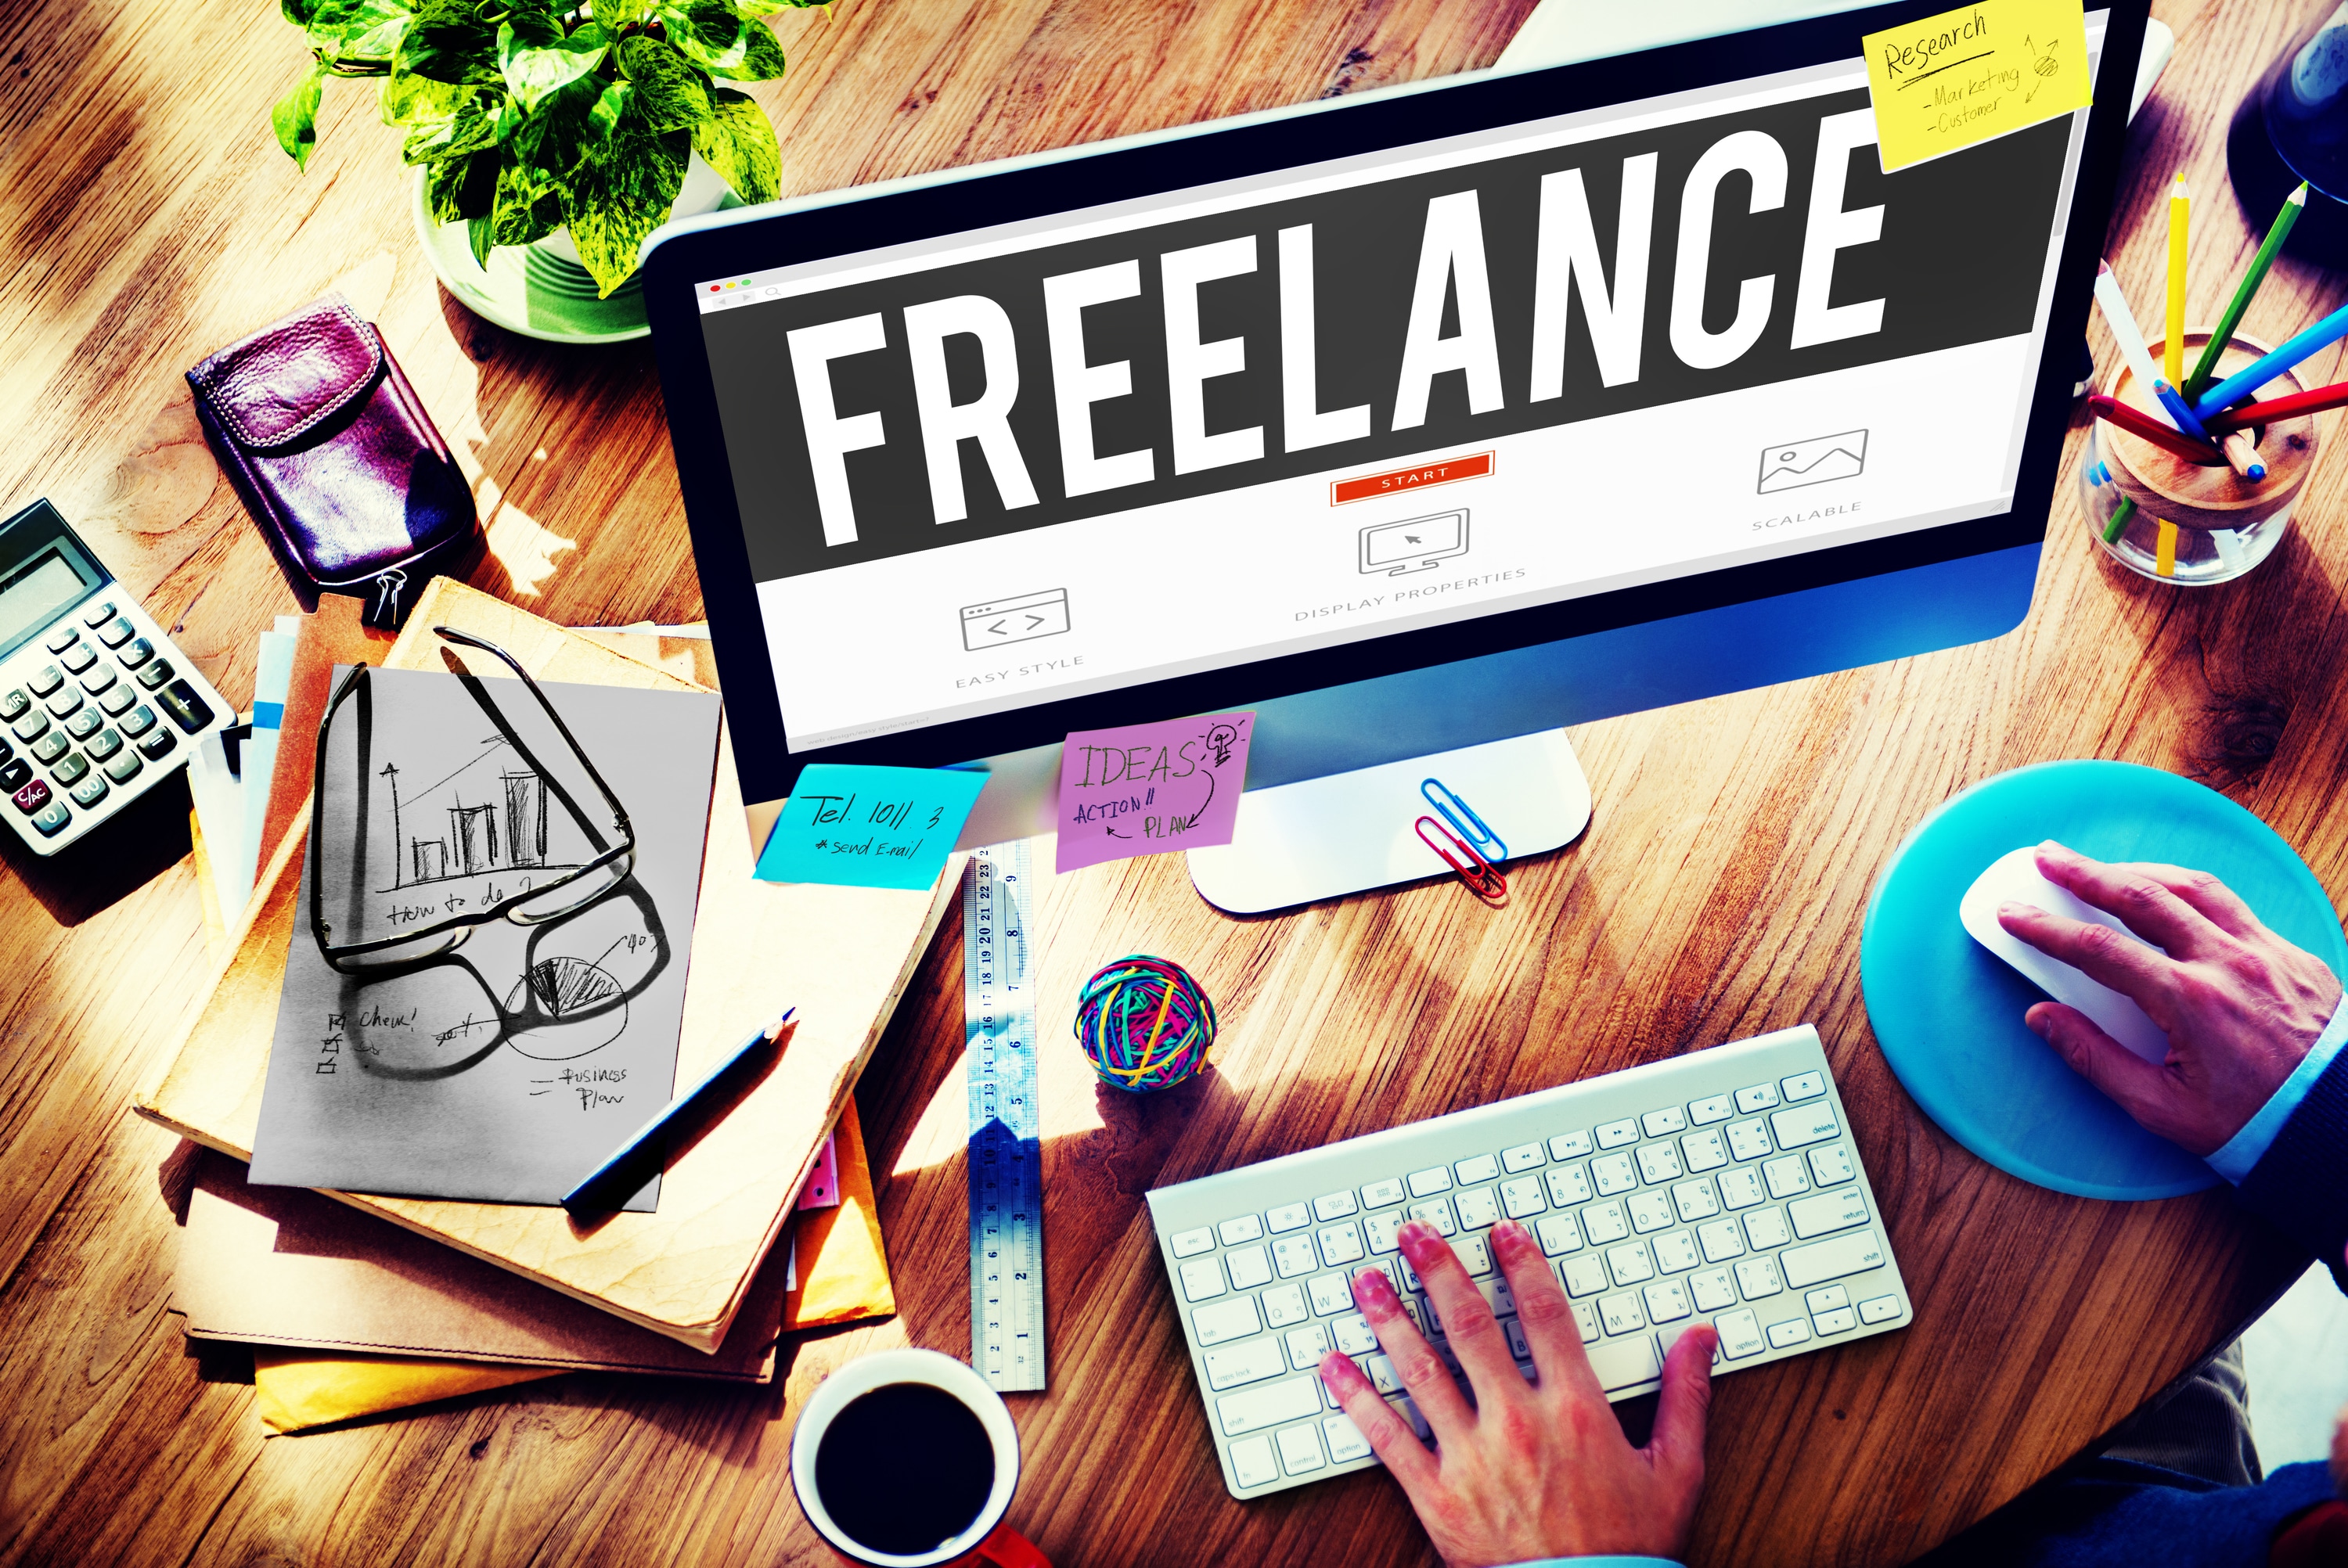 freelance content writing jobs means